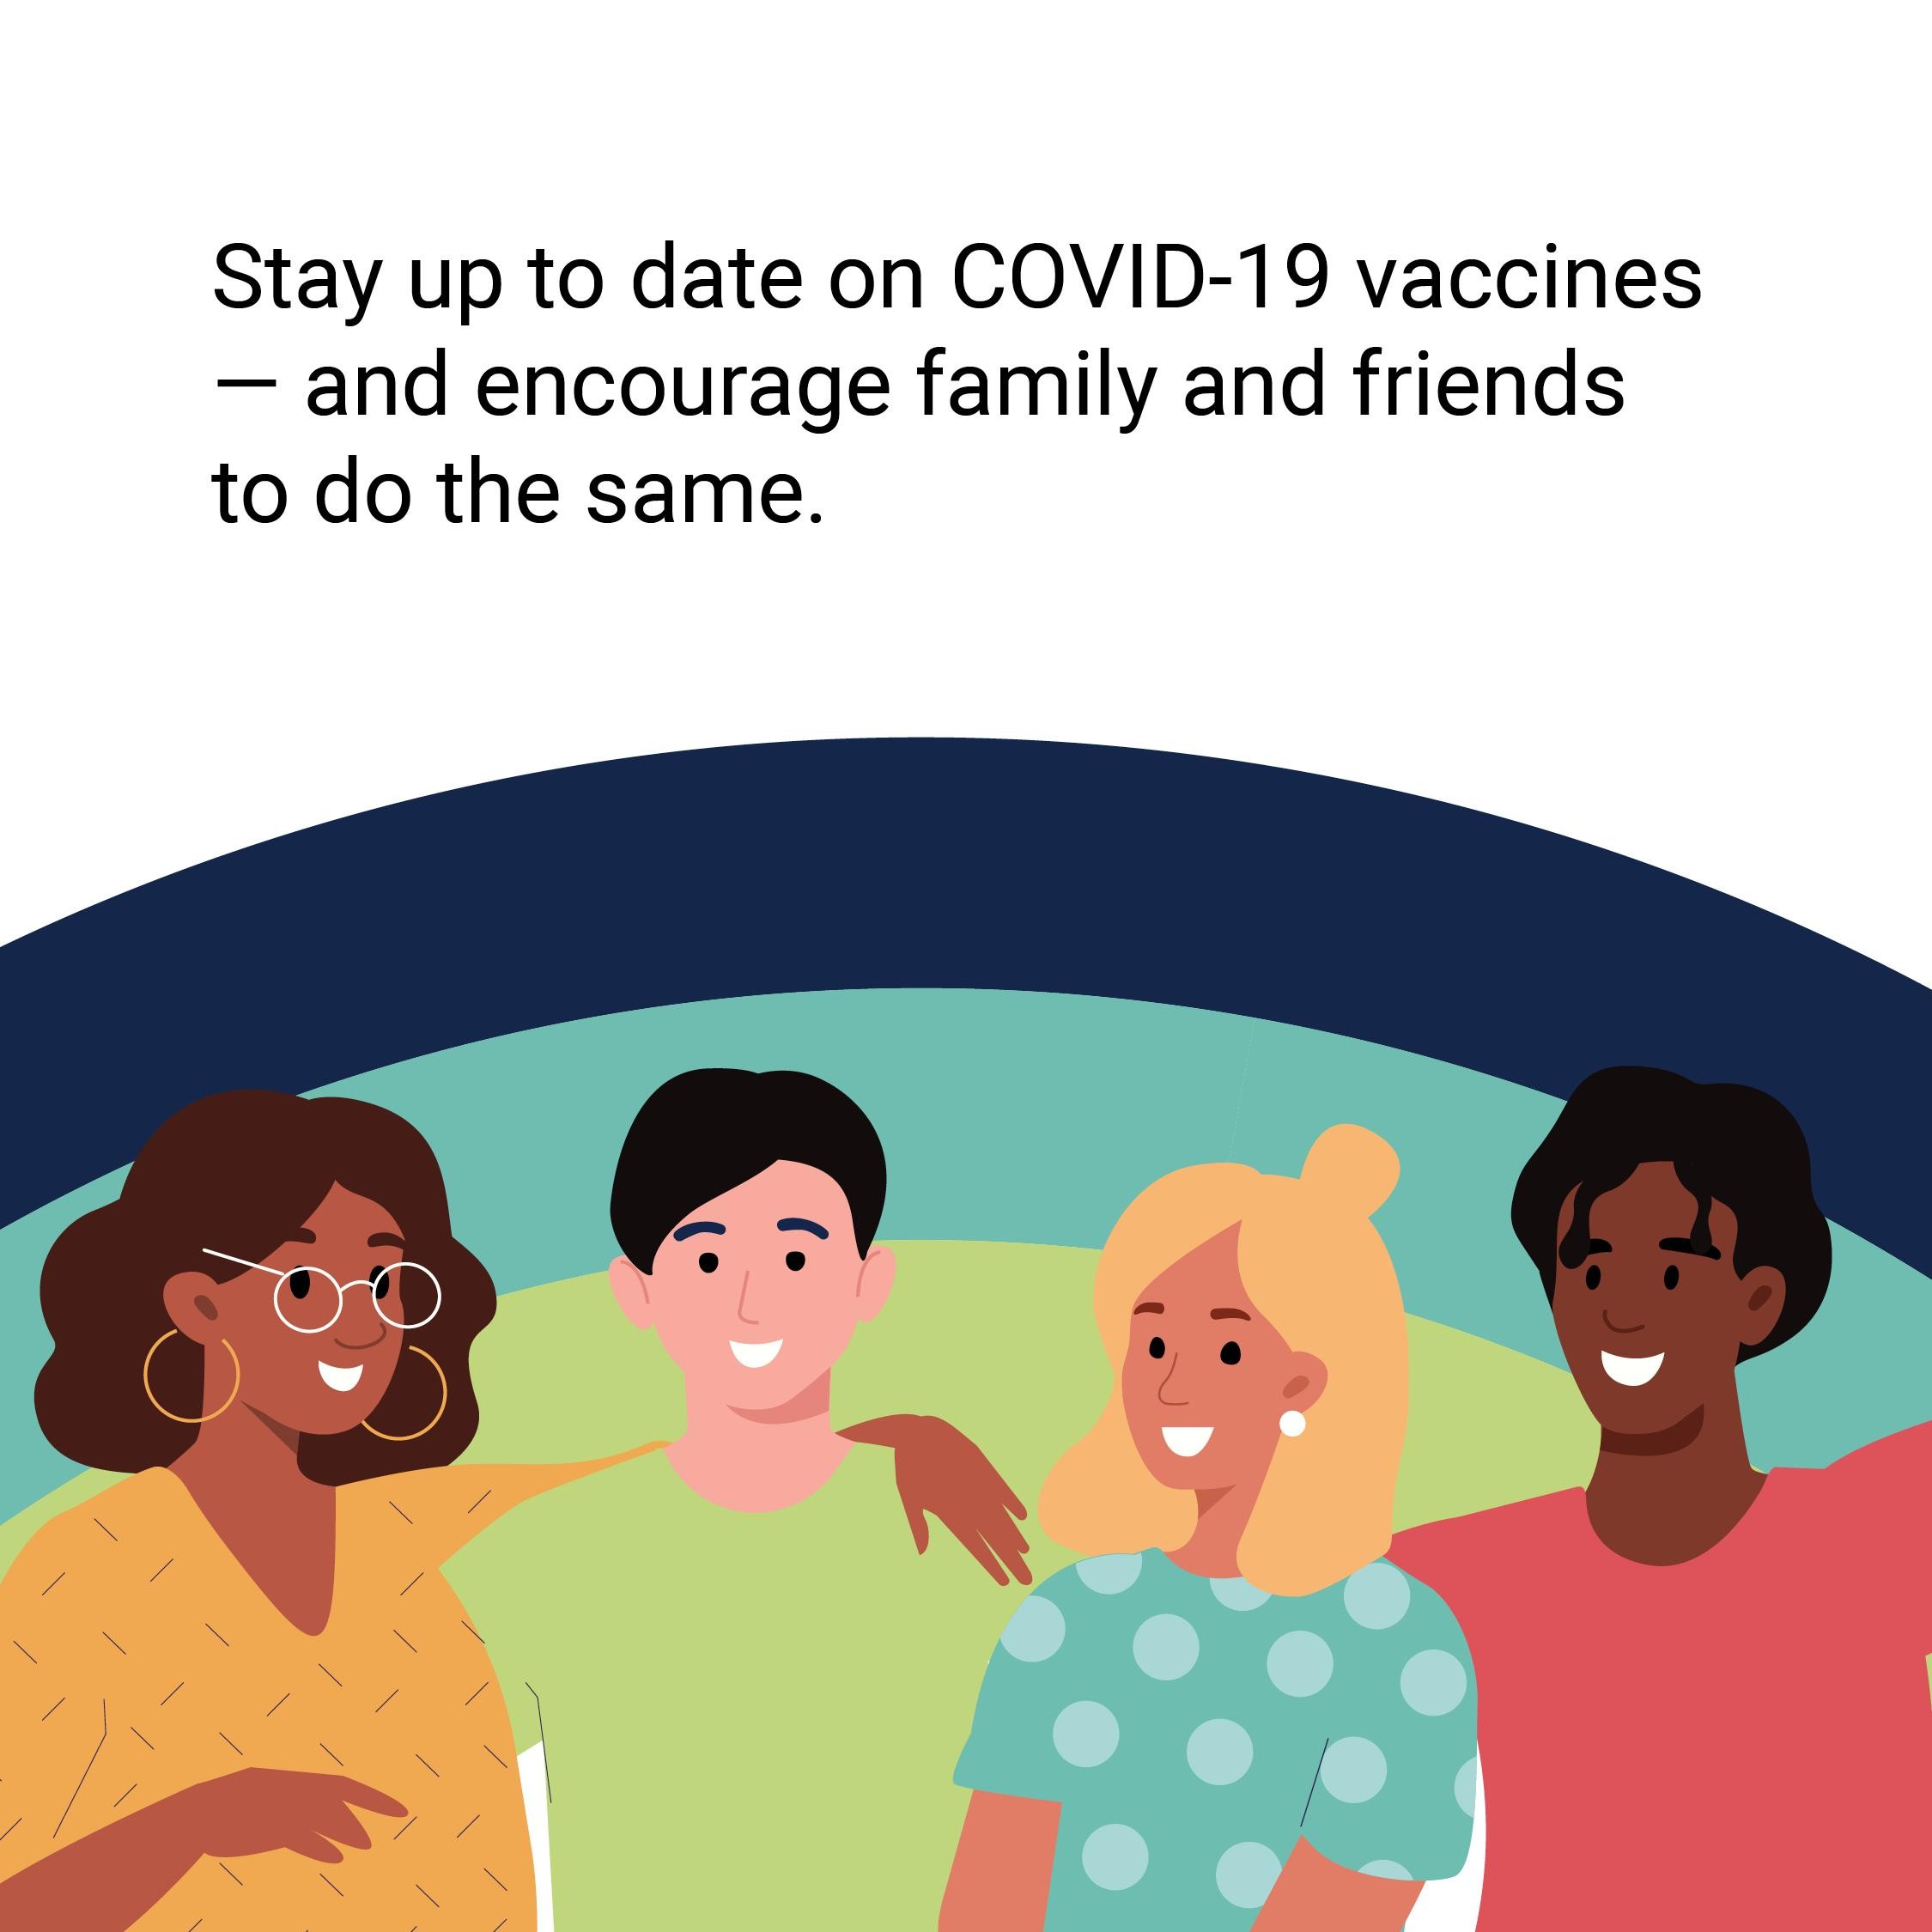 Drawing of four people smiling with their arms around each other. Text above the people reads "Stay up to date on COVID-19 and encourage family and friends to do the same."